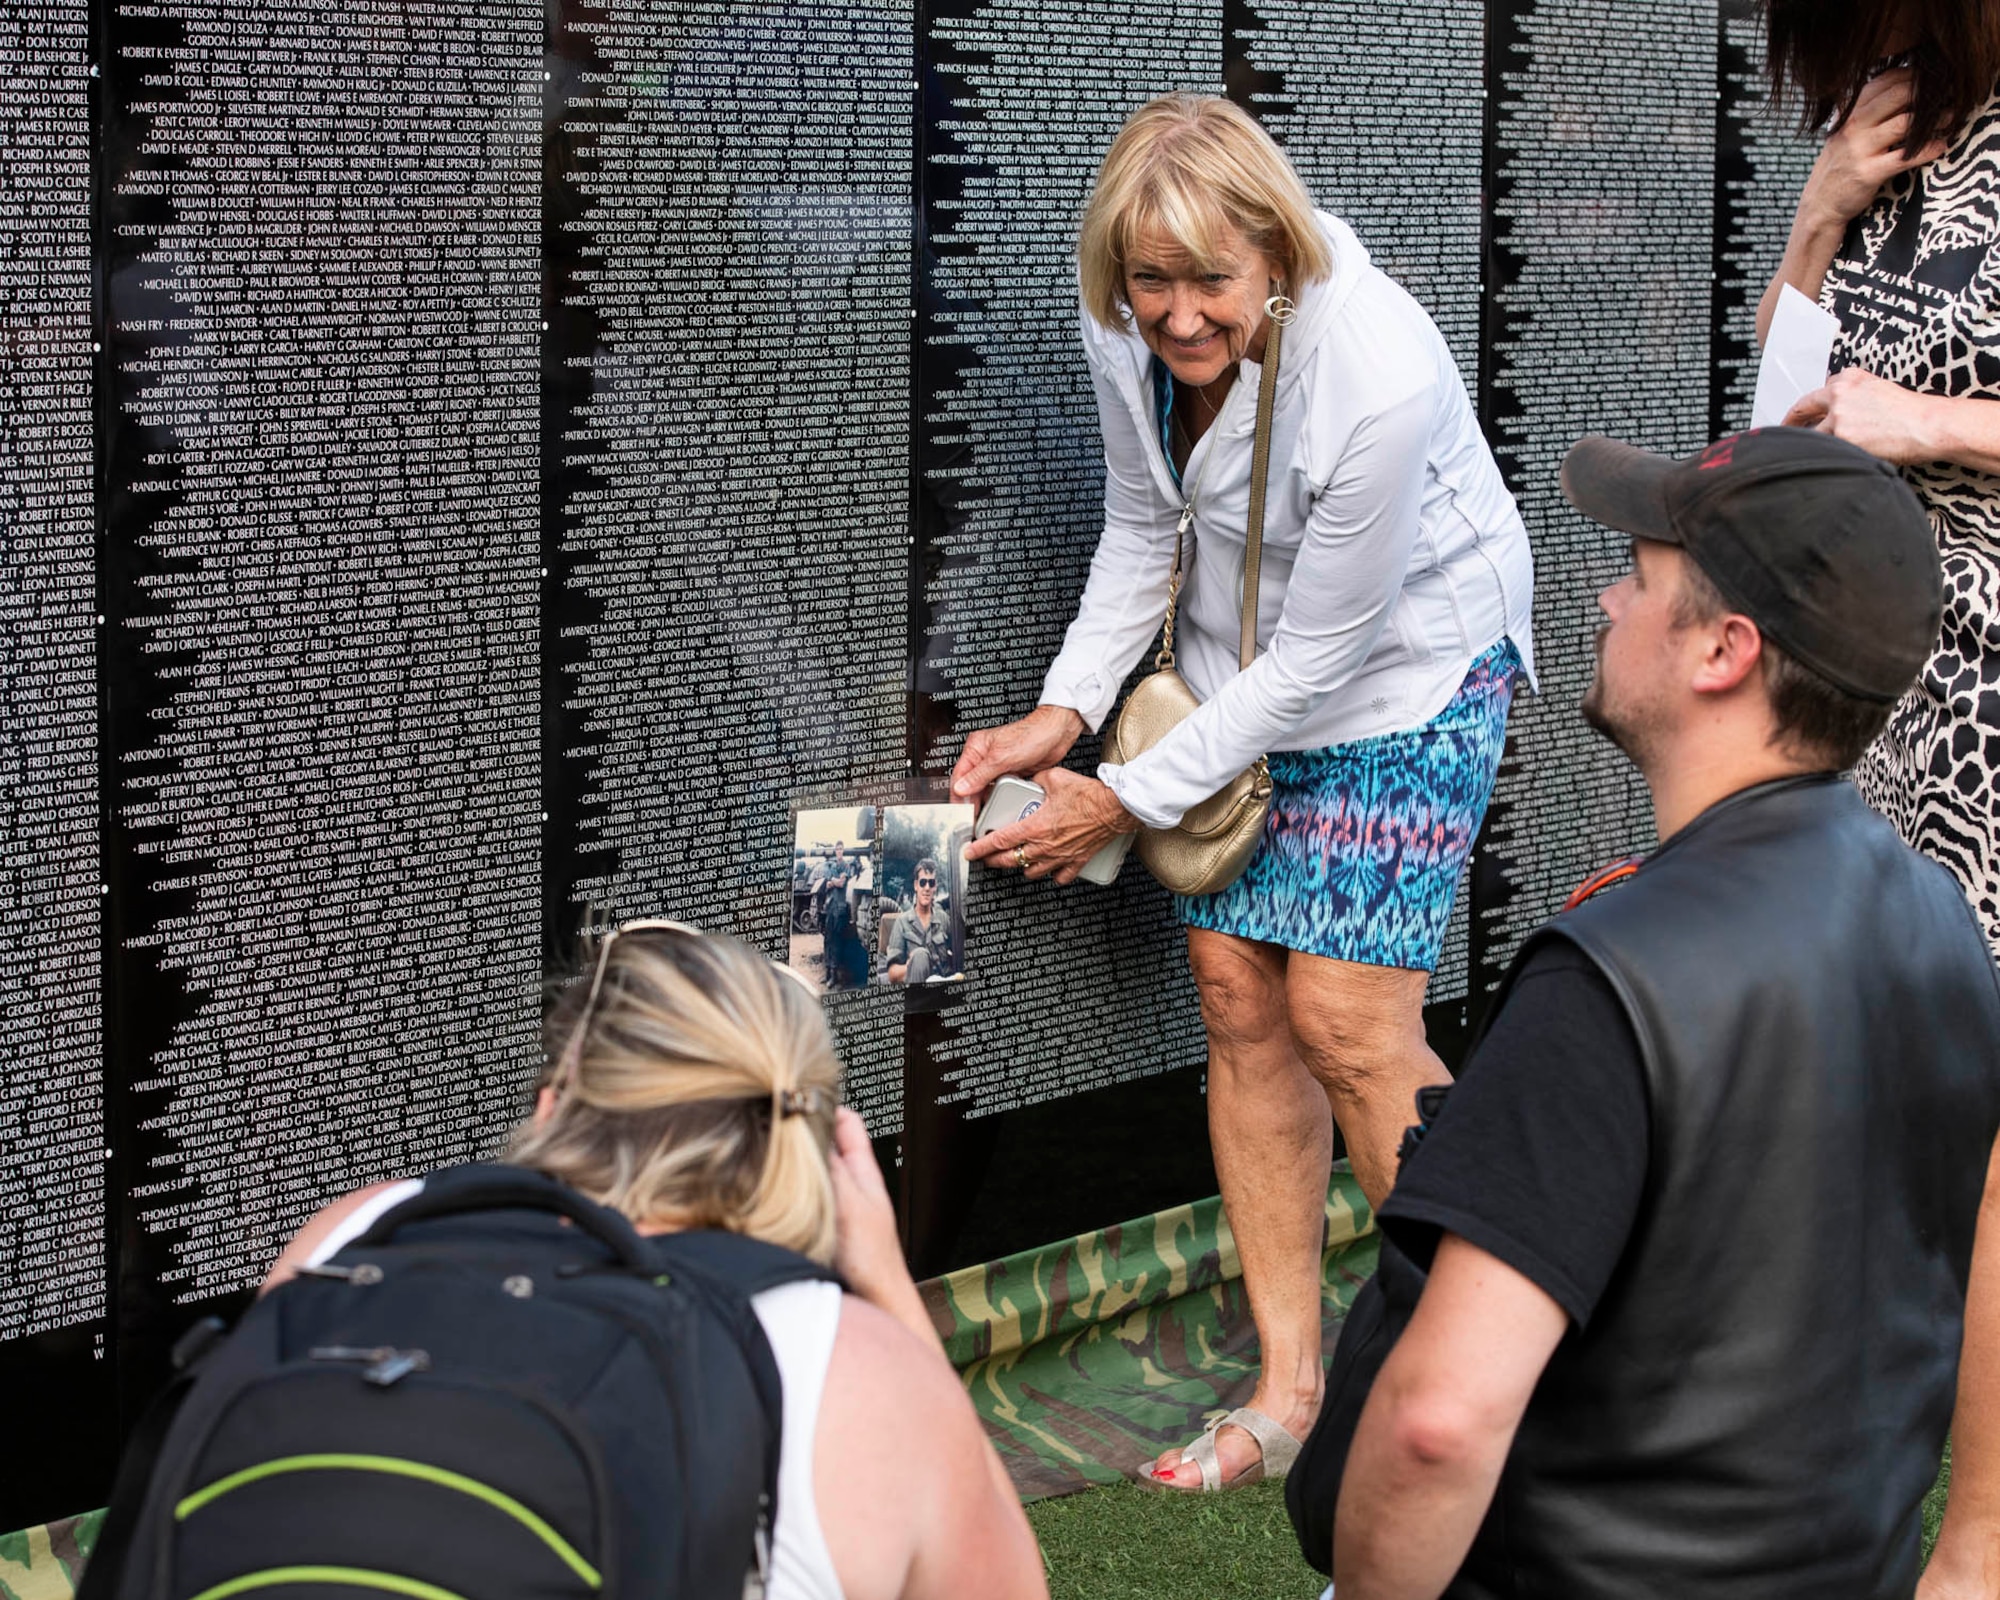 Visitors of “The Moving Wall,” a half-size replica of the Vietnam Memorial that stands in Washington D.C., search for names of loved ones, friends, and comrades lost on the Vietnam War following the opening ceremony of the wall June 13, 2019 in Medical Lake, Wash. Visitors can view the display 24 hours a day at the 200 block of South Prentis St. in Medical Lake. (U.S. Air National Guard photo by Staff Sgt. Rose M. Lust/Released)